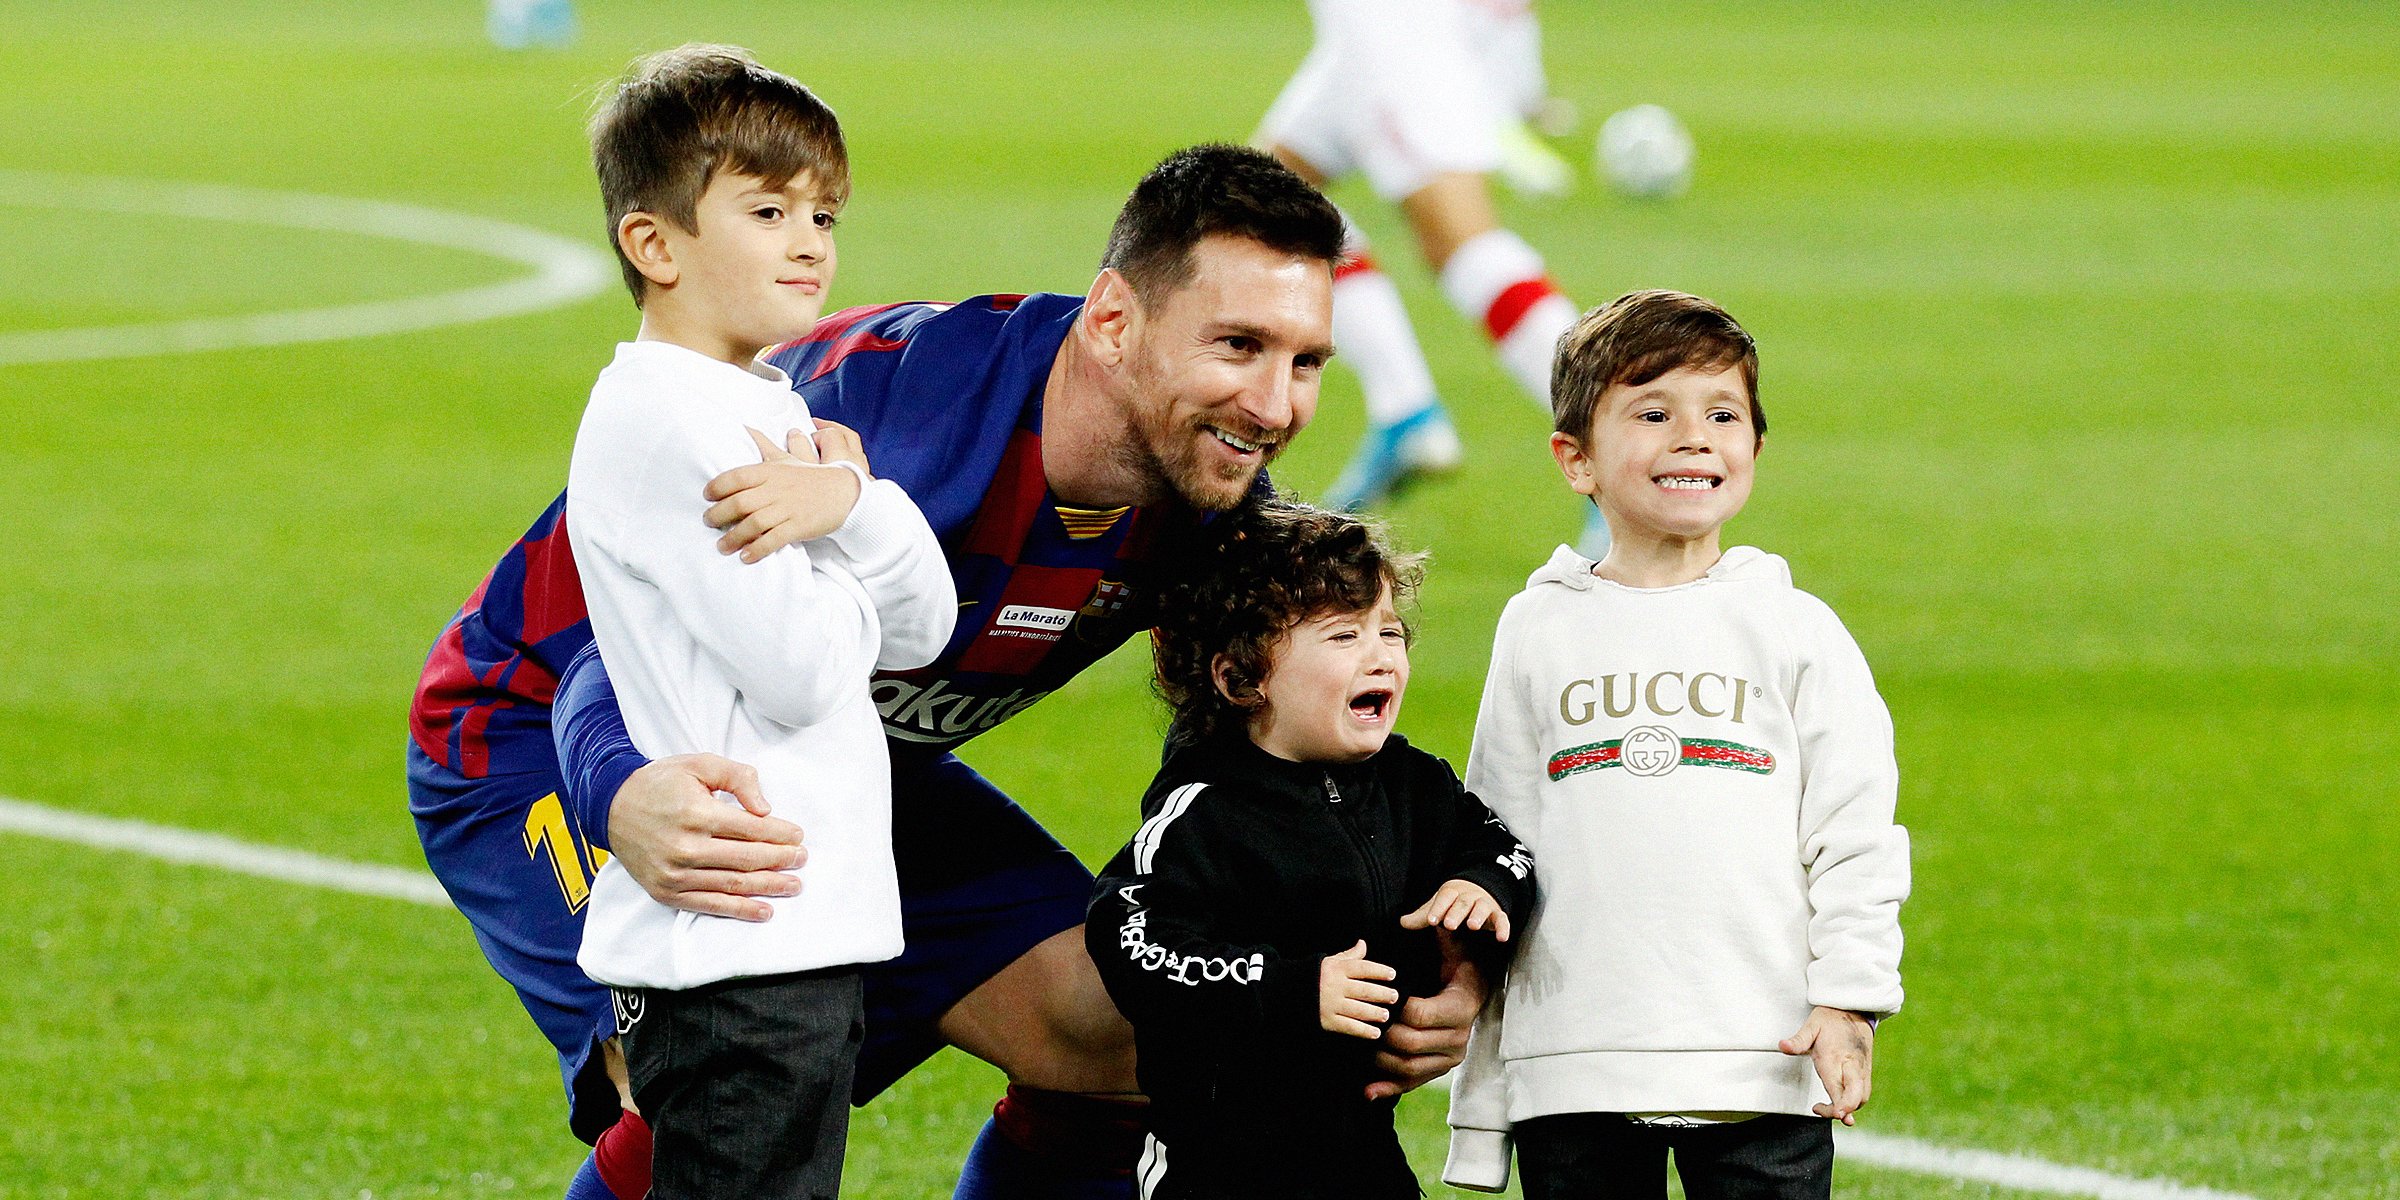 Lionel Messi with his sons Thiago, Mateo, and Ciro. Antonella Roccuzzo, Lionel Messi and their three sons. Source: Getty Images